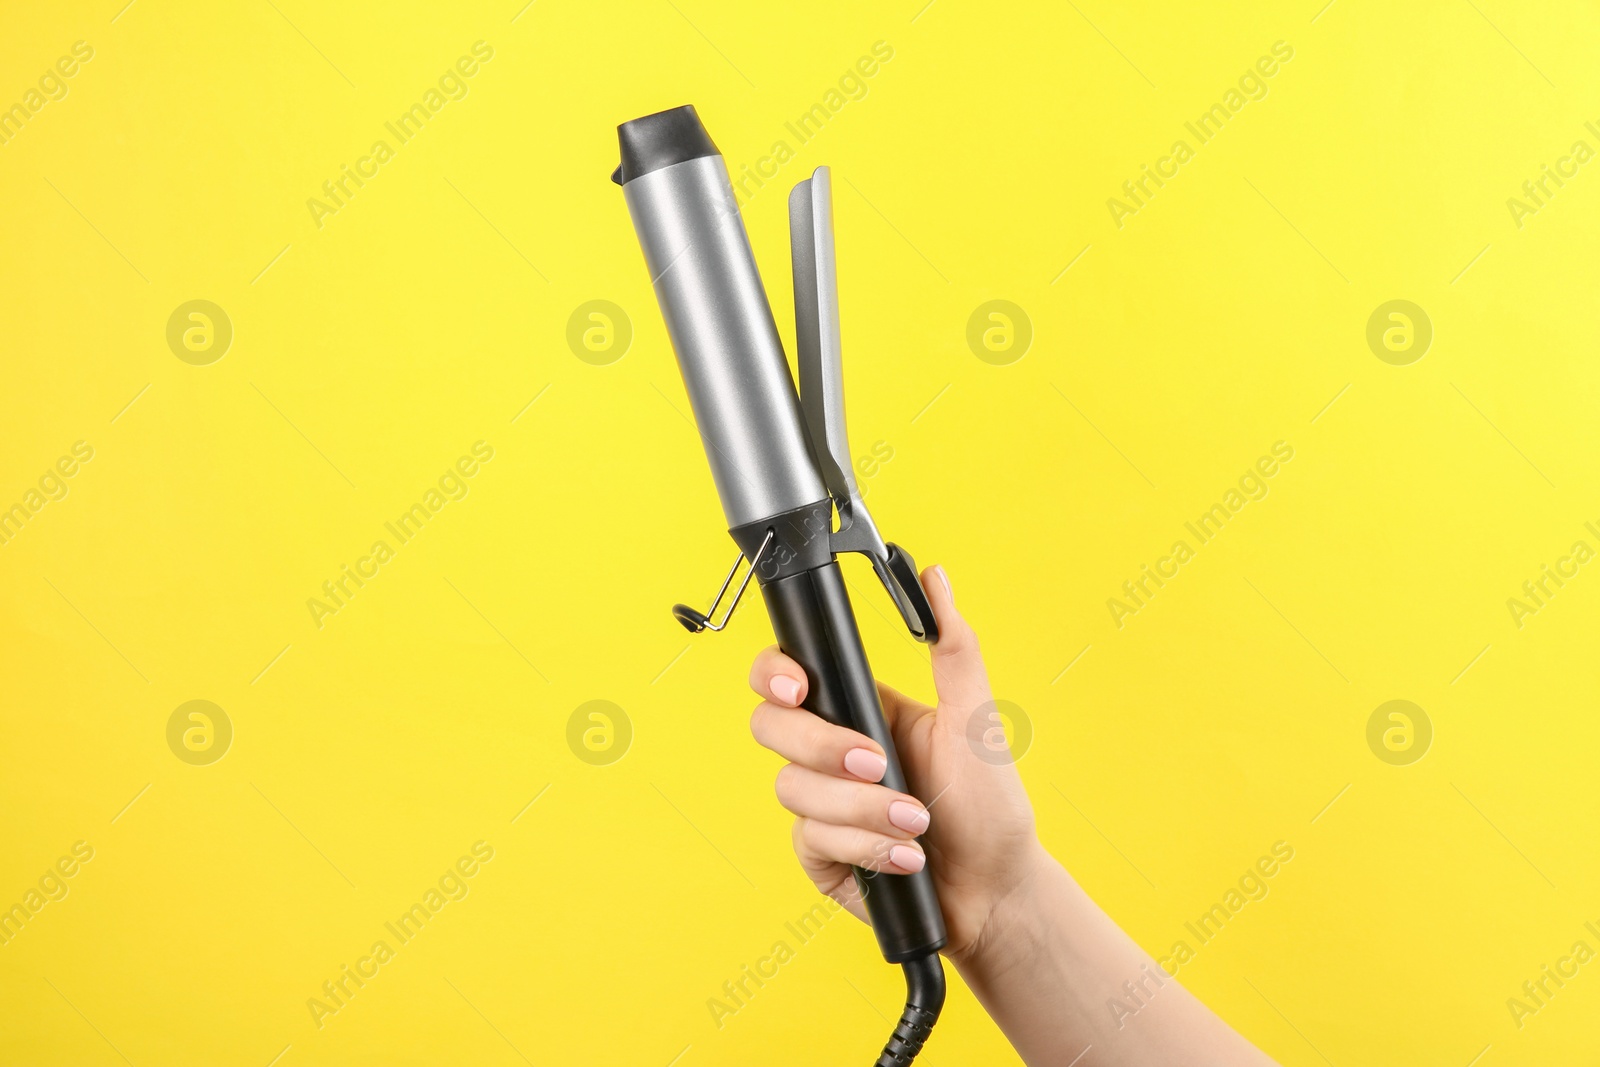 Photo of Hair styling appliance. Woman holding curling iron on yellow background, closeup